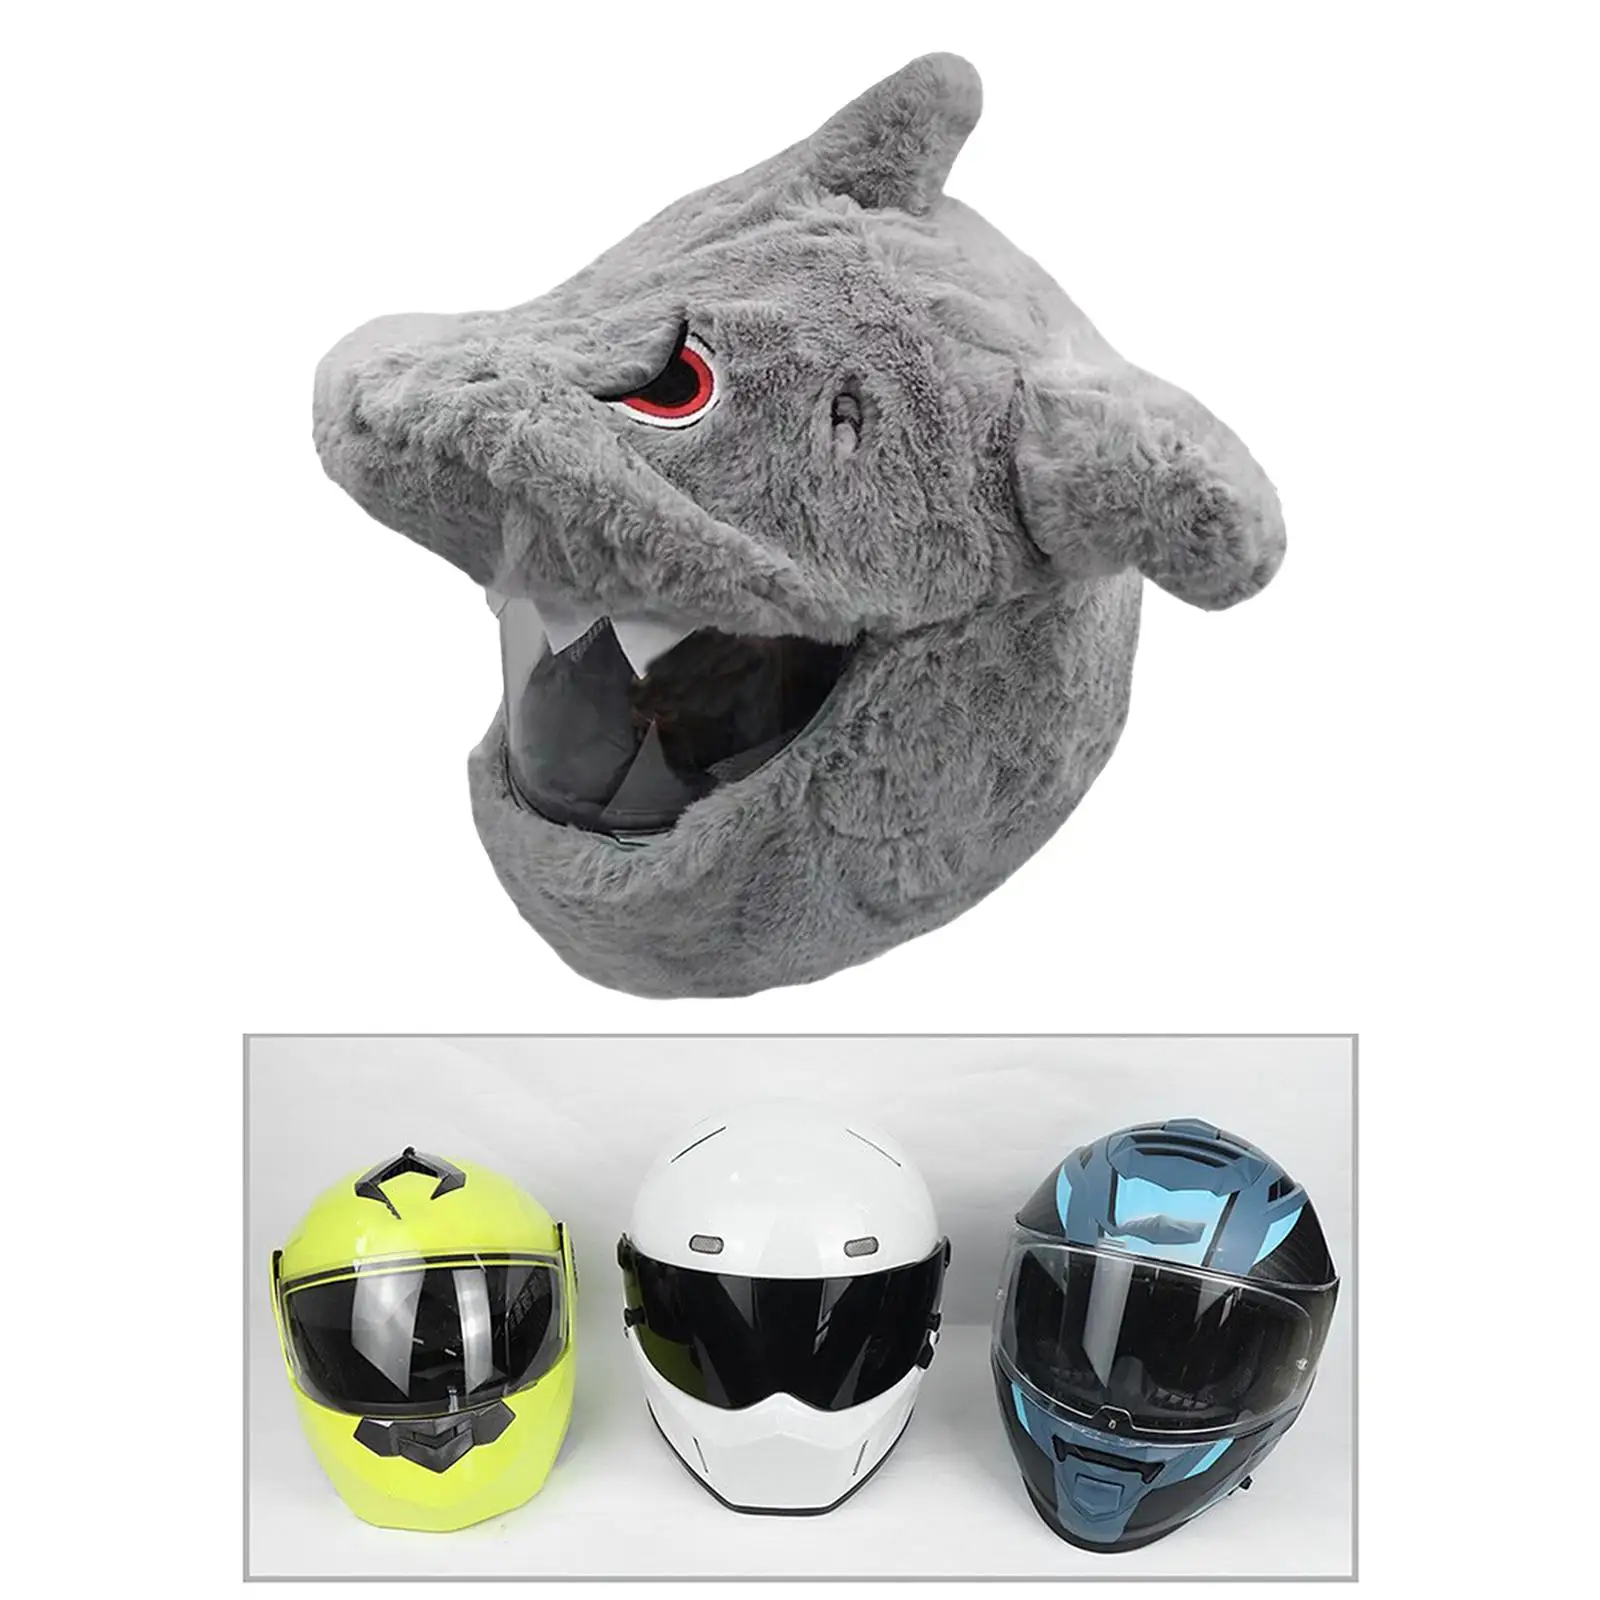 Motorcycle Helmet Cover Dust Cap Fun Riding Gear Warm Easy to Install Full Face Helmet Protection Cover for Girls and Boys